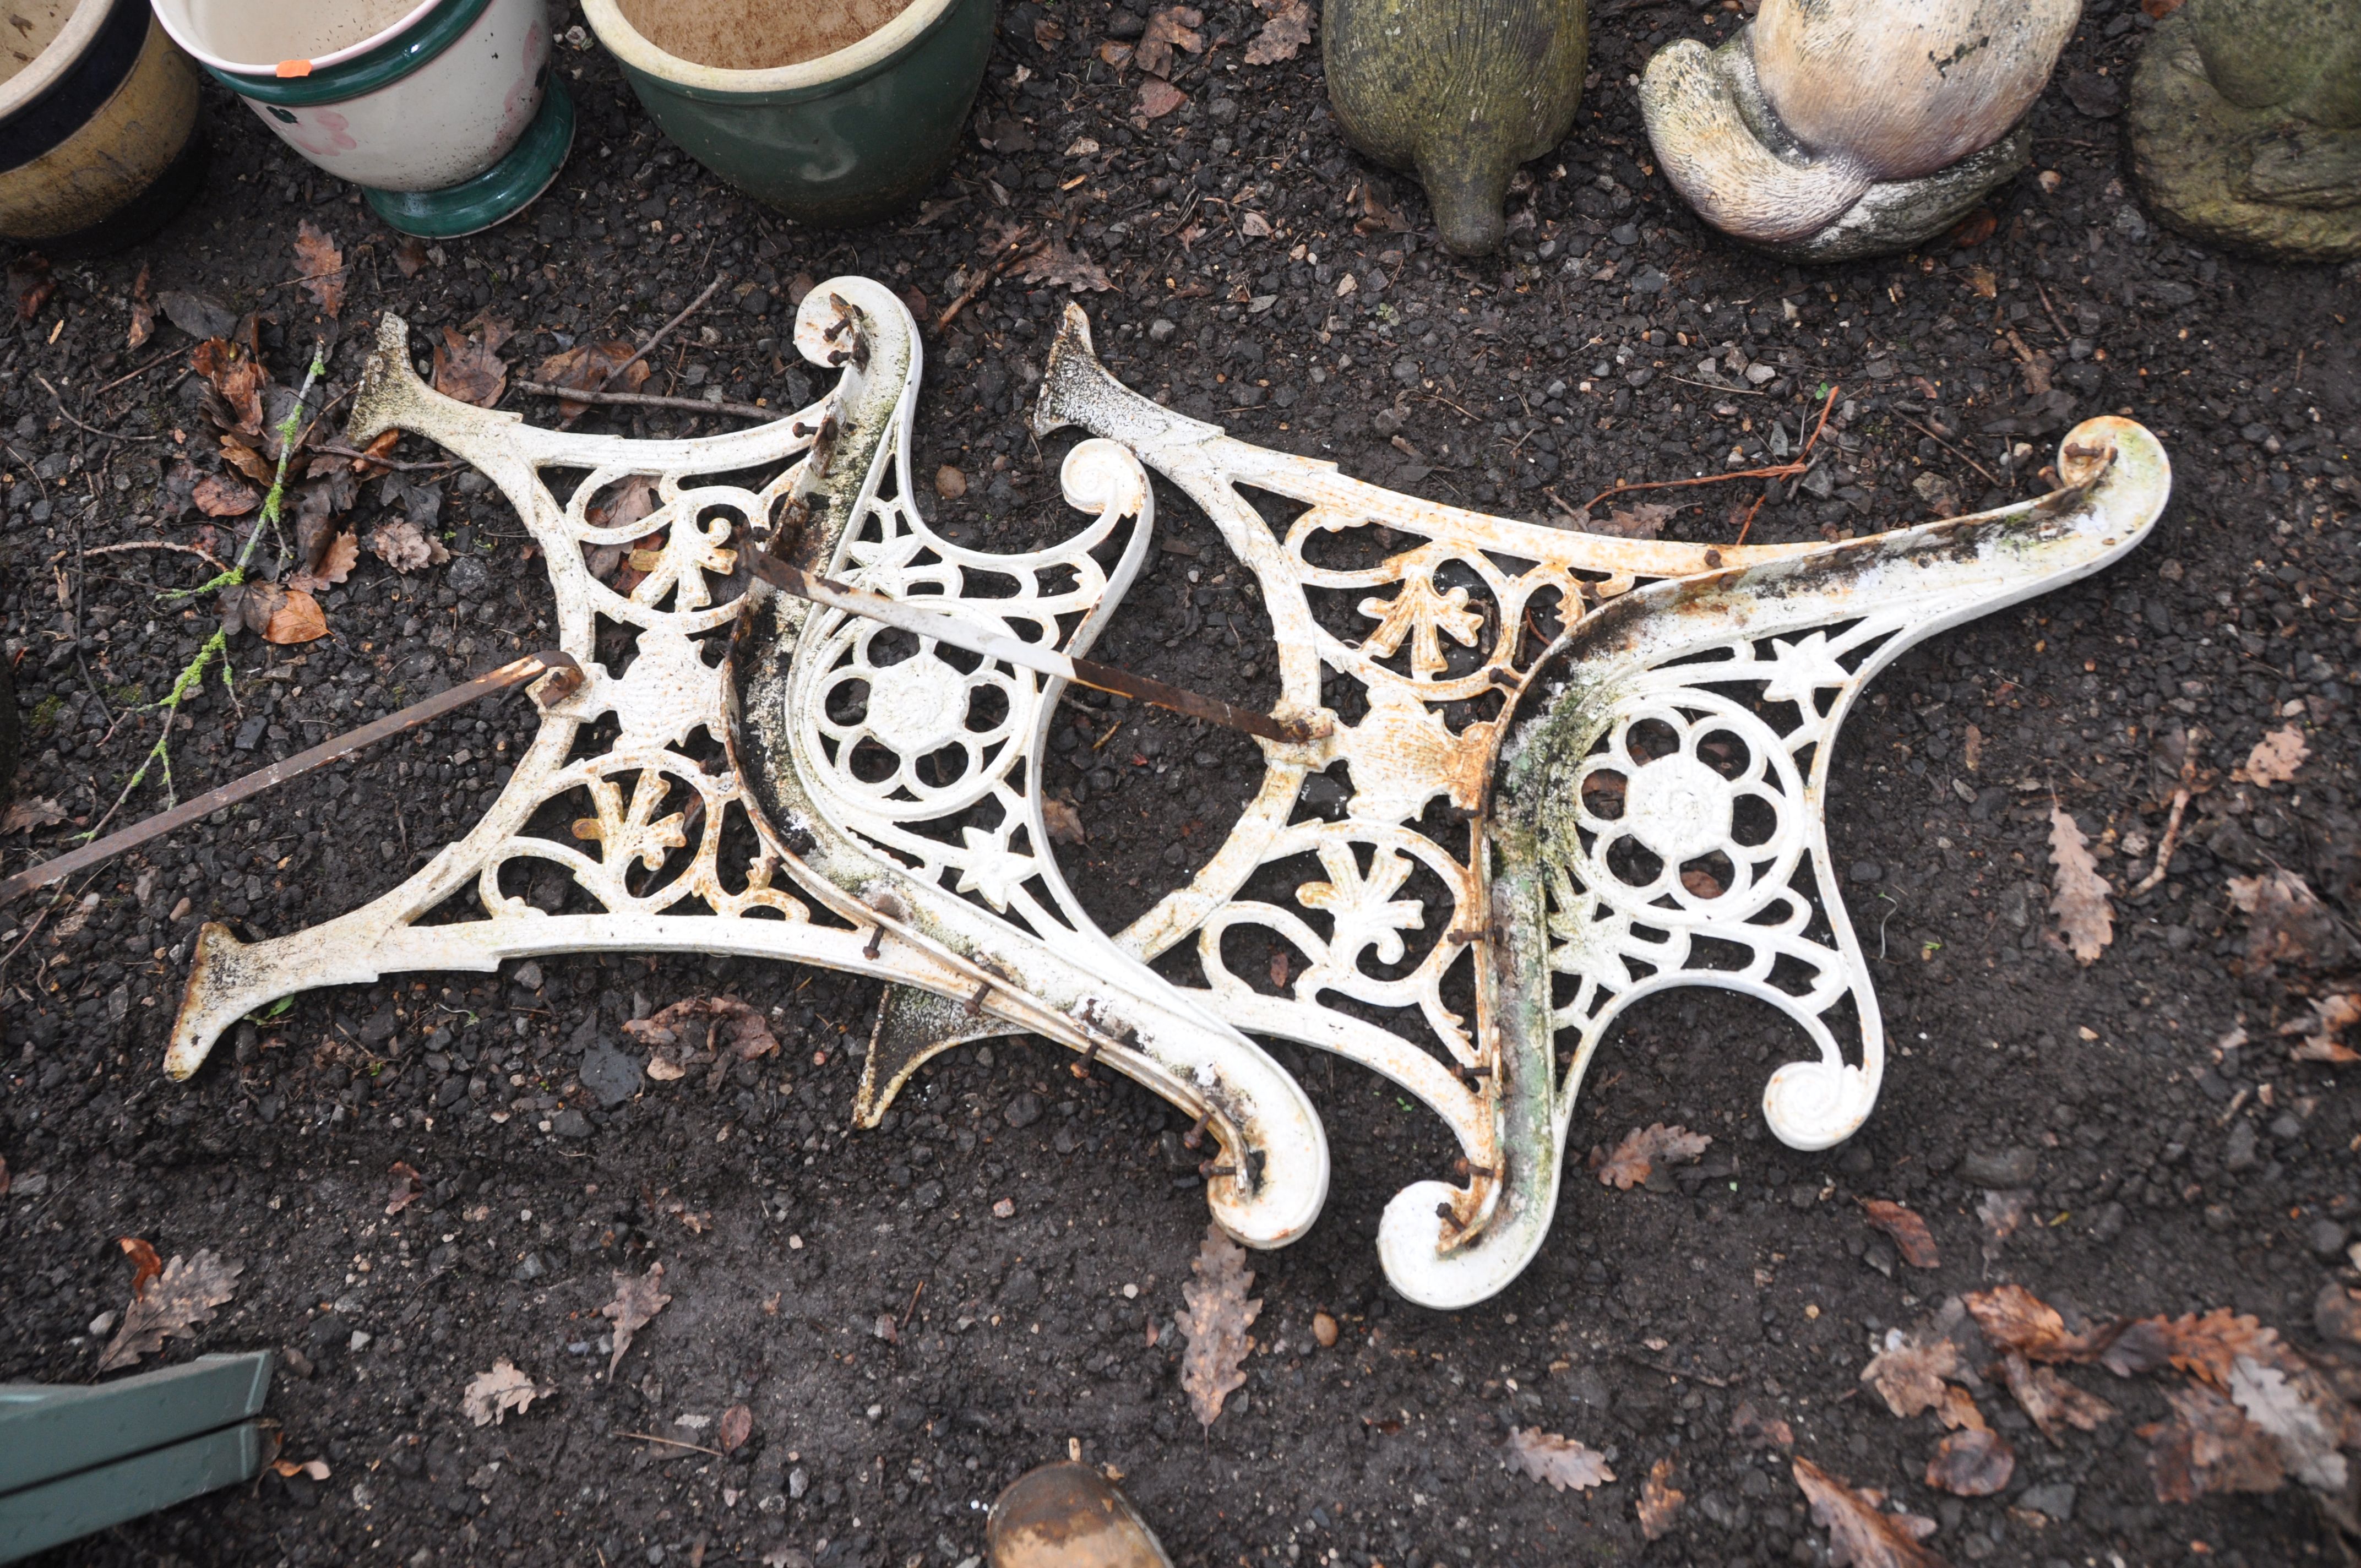 A PAIR OF CAST IRON BENCH ENDS overpainted in white